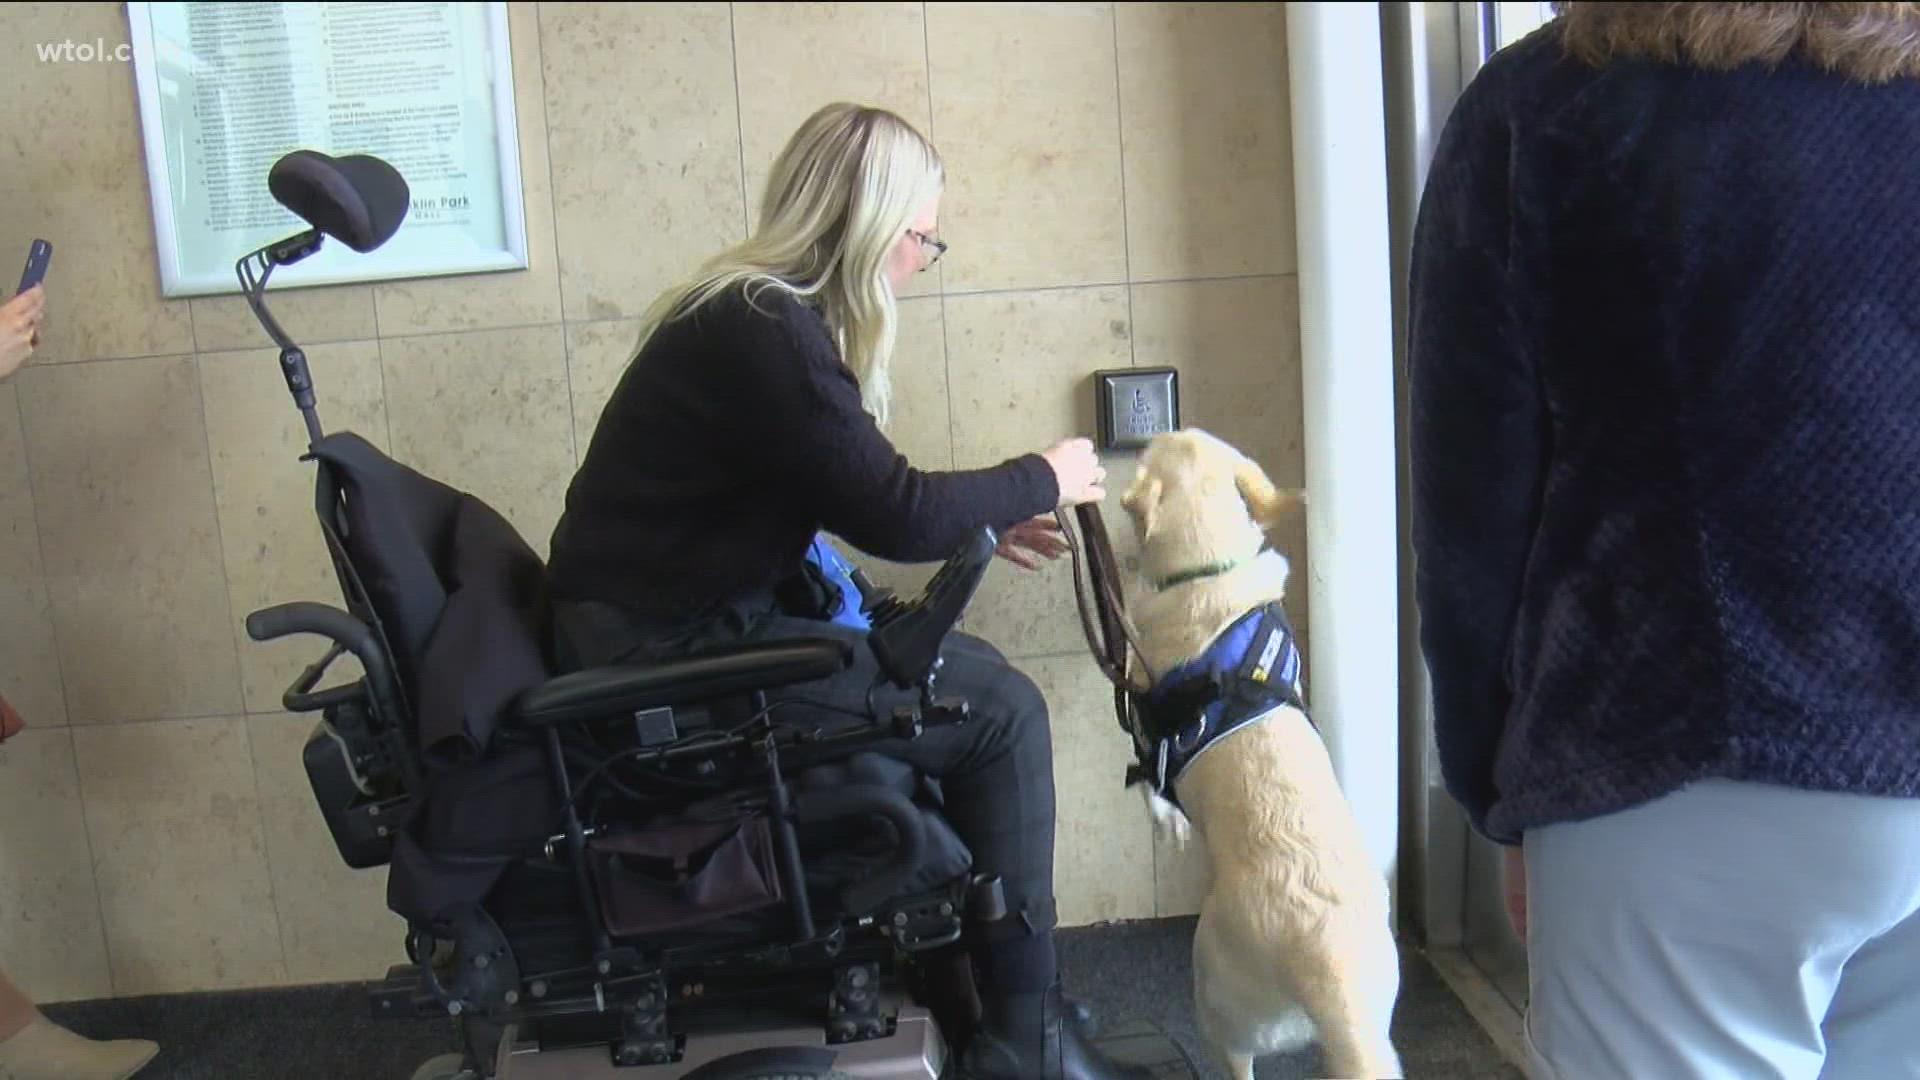 WTOL 11 tagged along for a service dog training session to get a closer look at The Ability Center's process of readying a service dog for a future partner's needs.